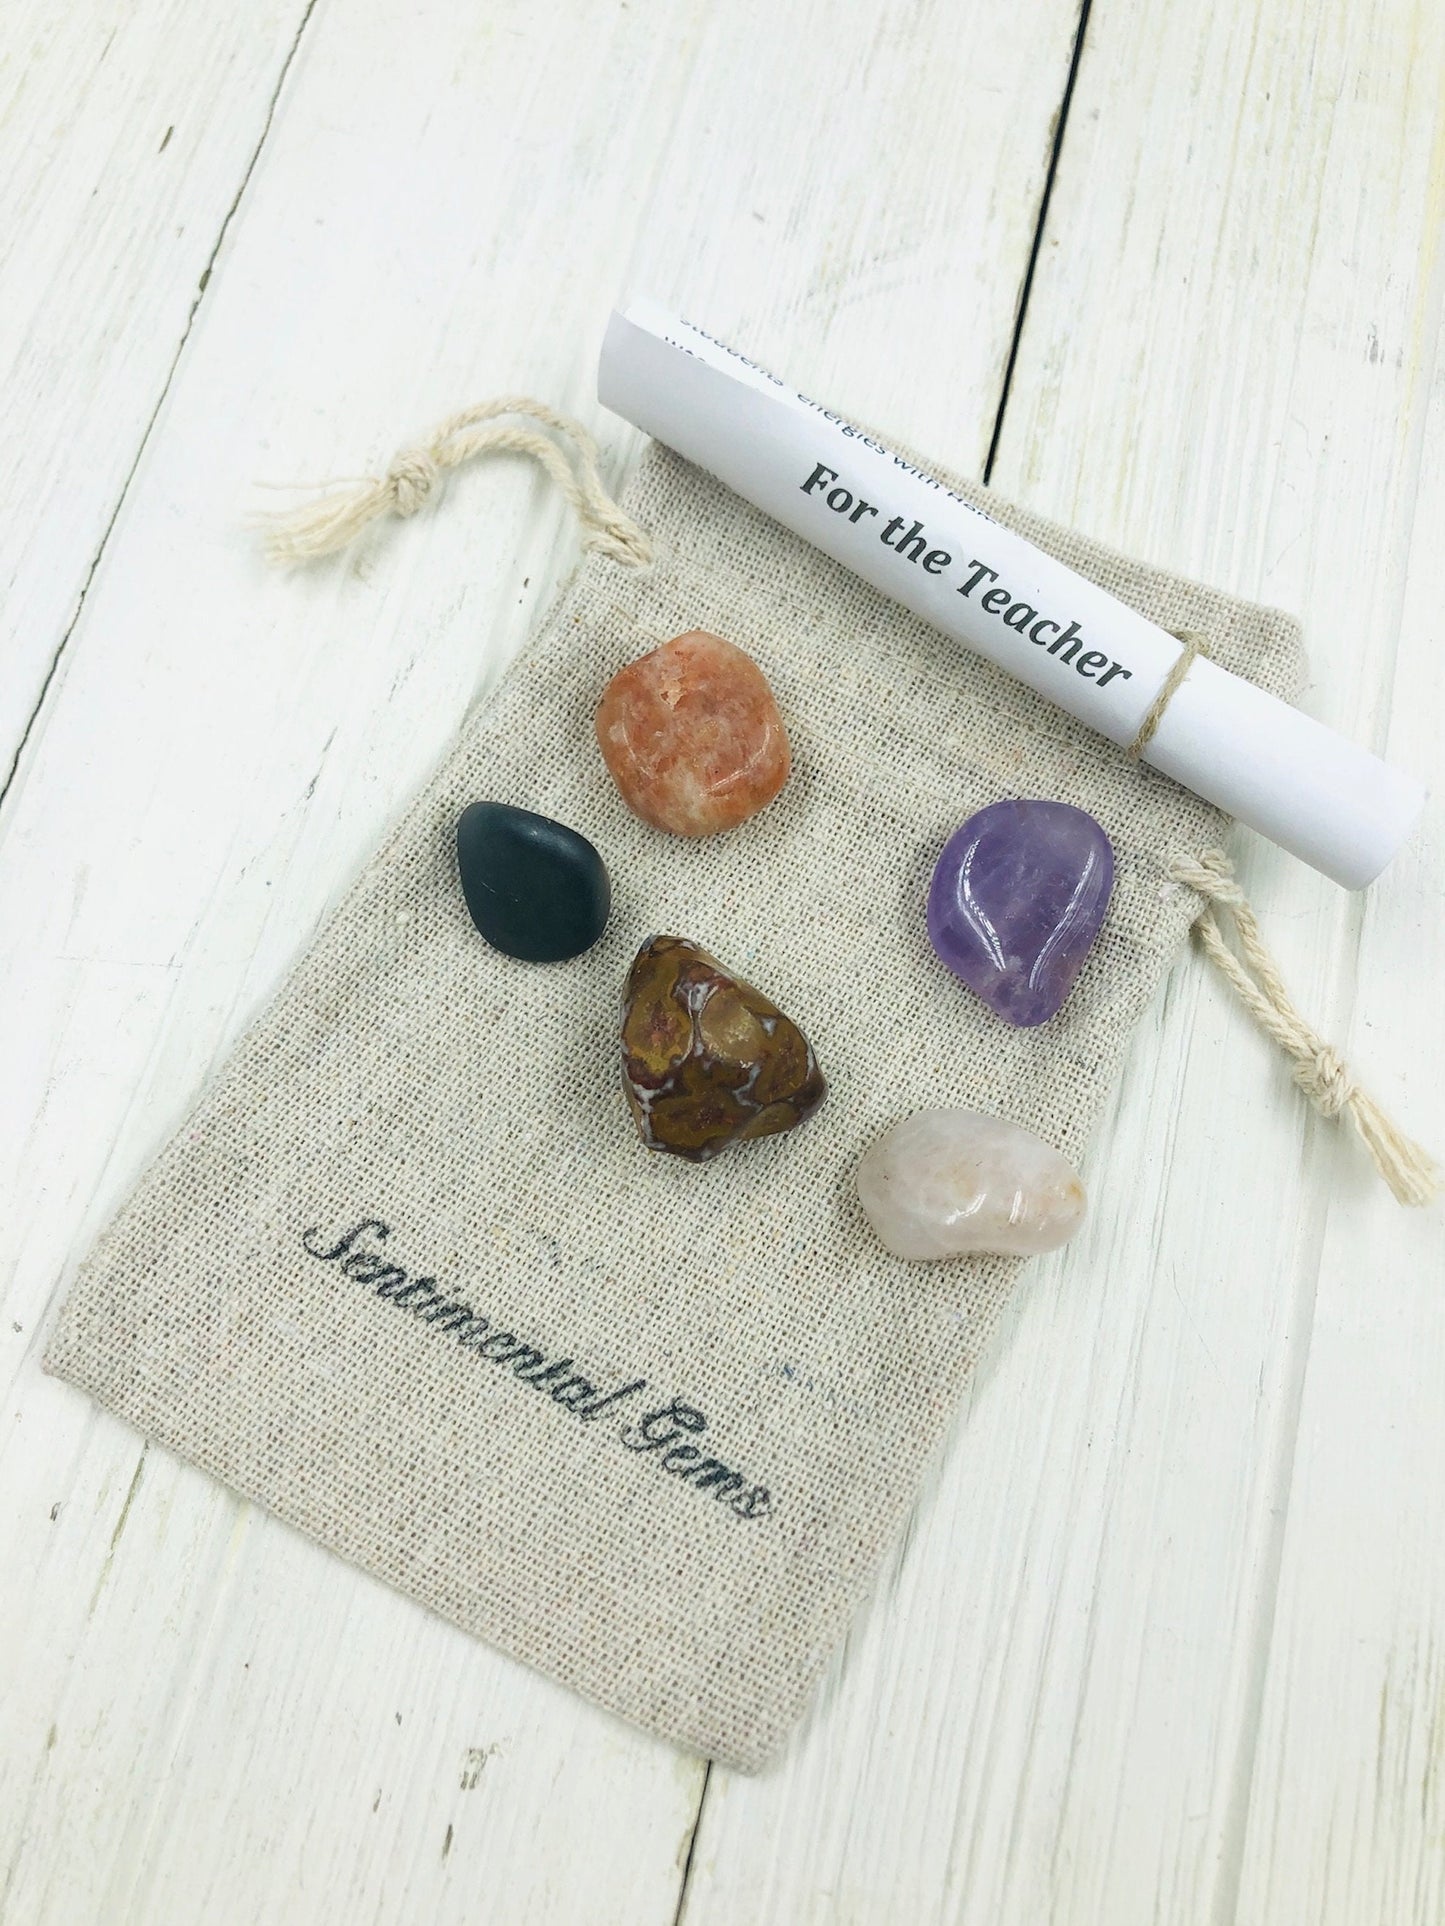 Crystal Gift Set for Teachers - Gratitude and Inspiration Collection